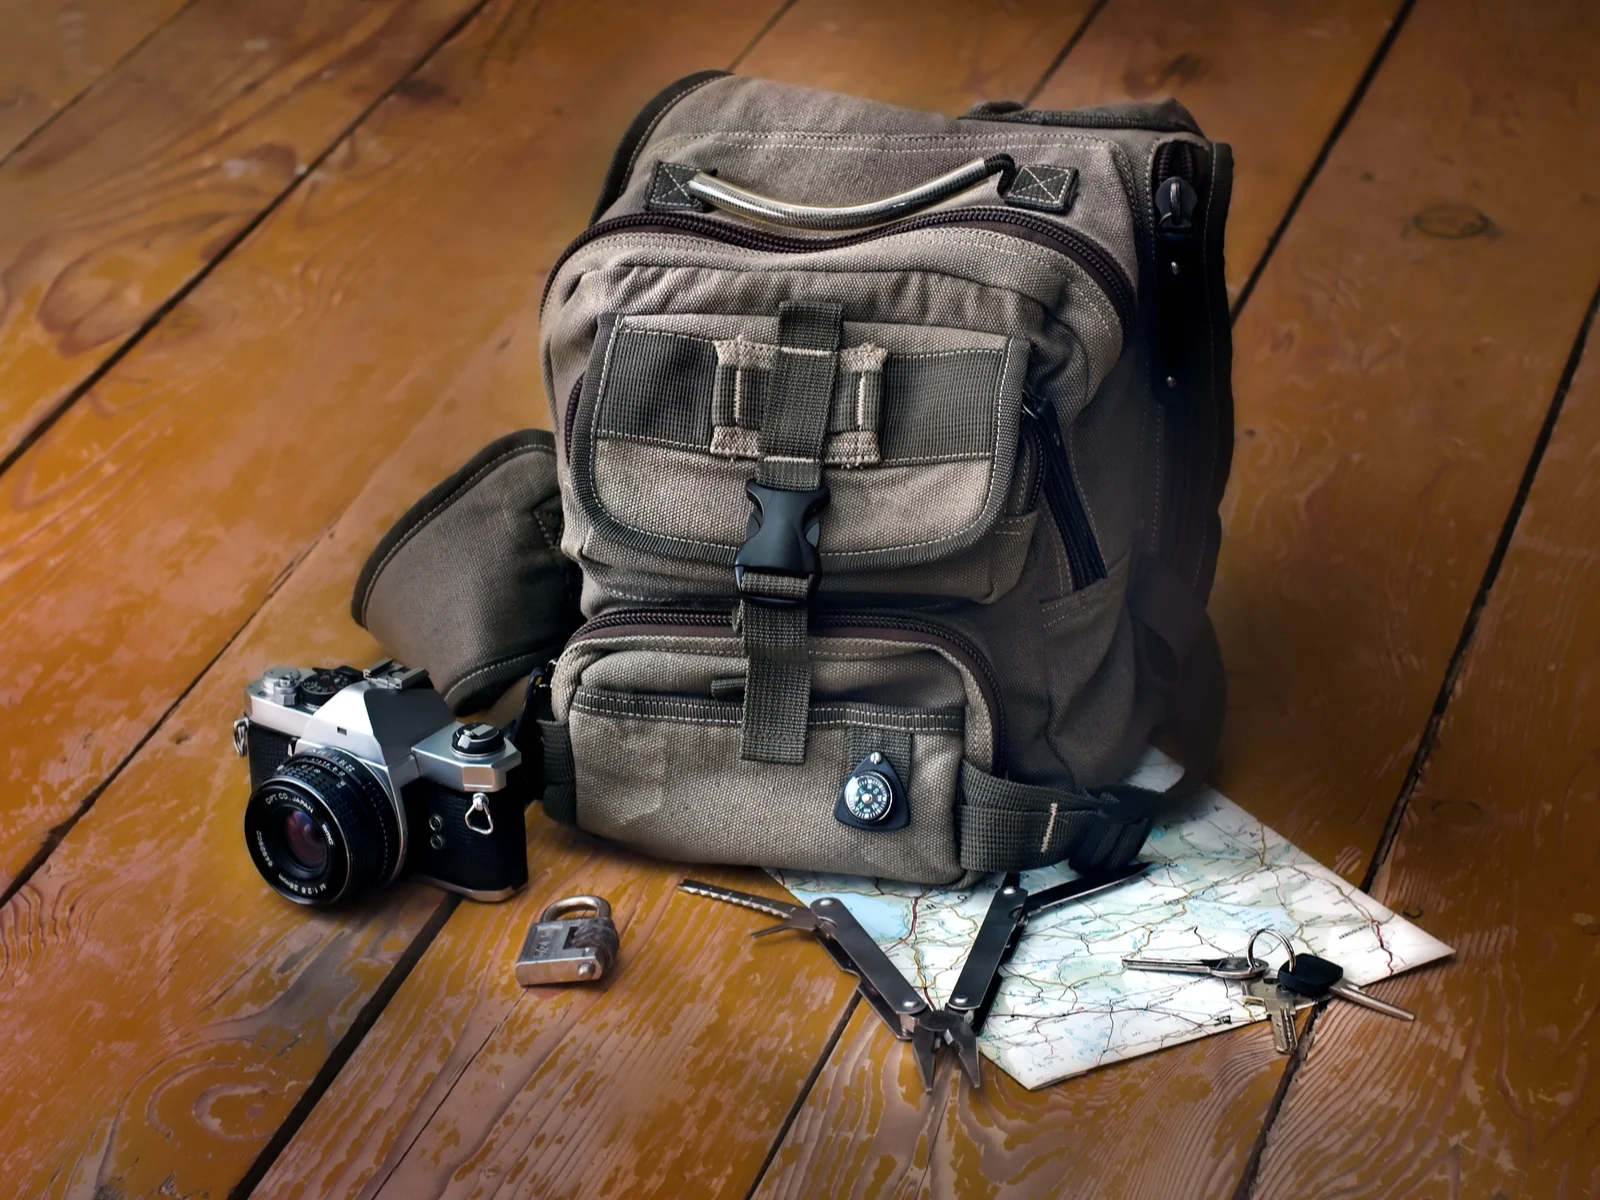 Bag and accessories on a table next to a map and a camera